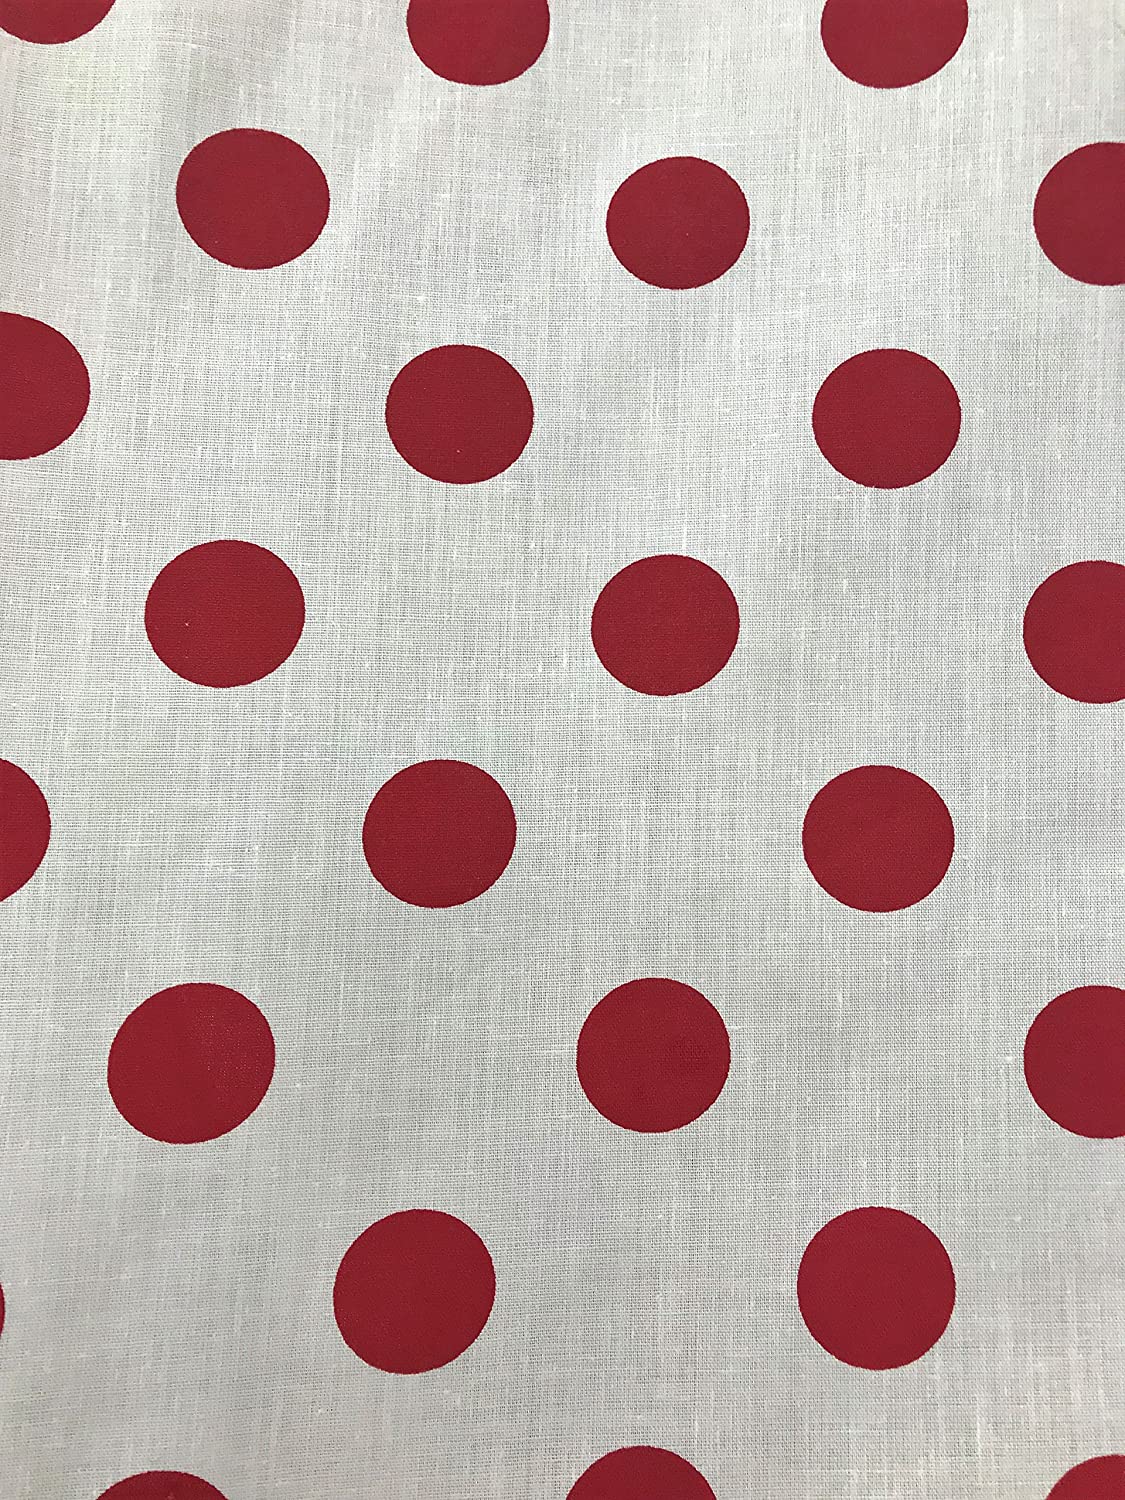 Big Polka Dots Poly Cotton Print Fabric by The Yard (White/Red Dots)